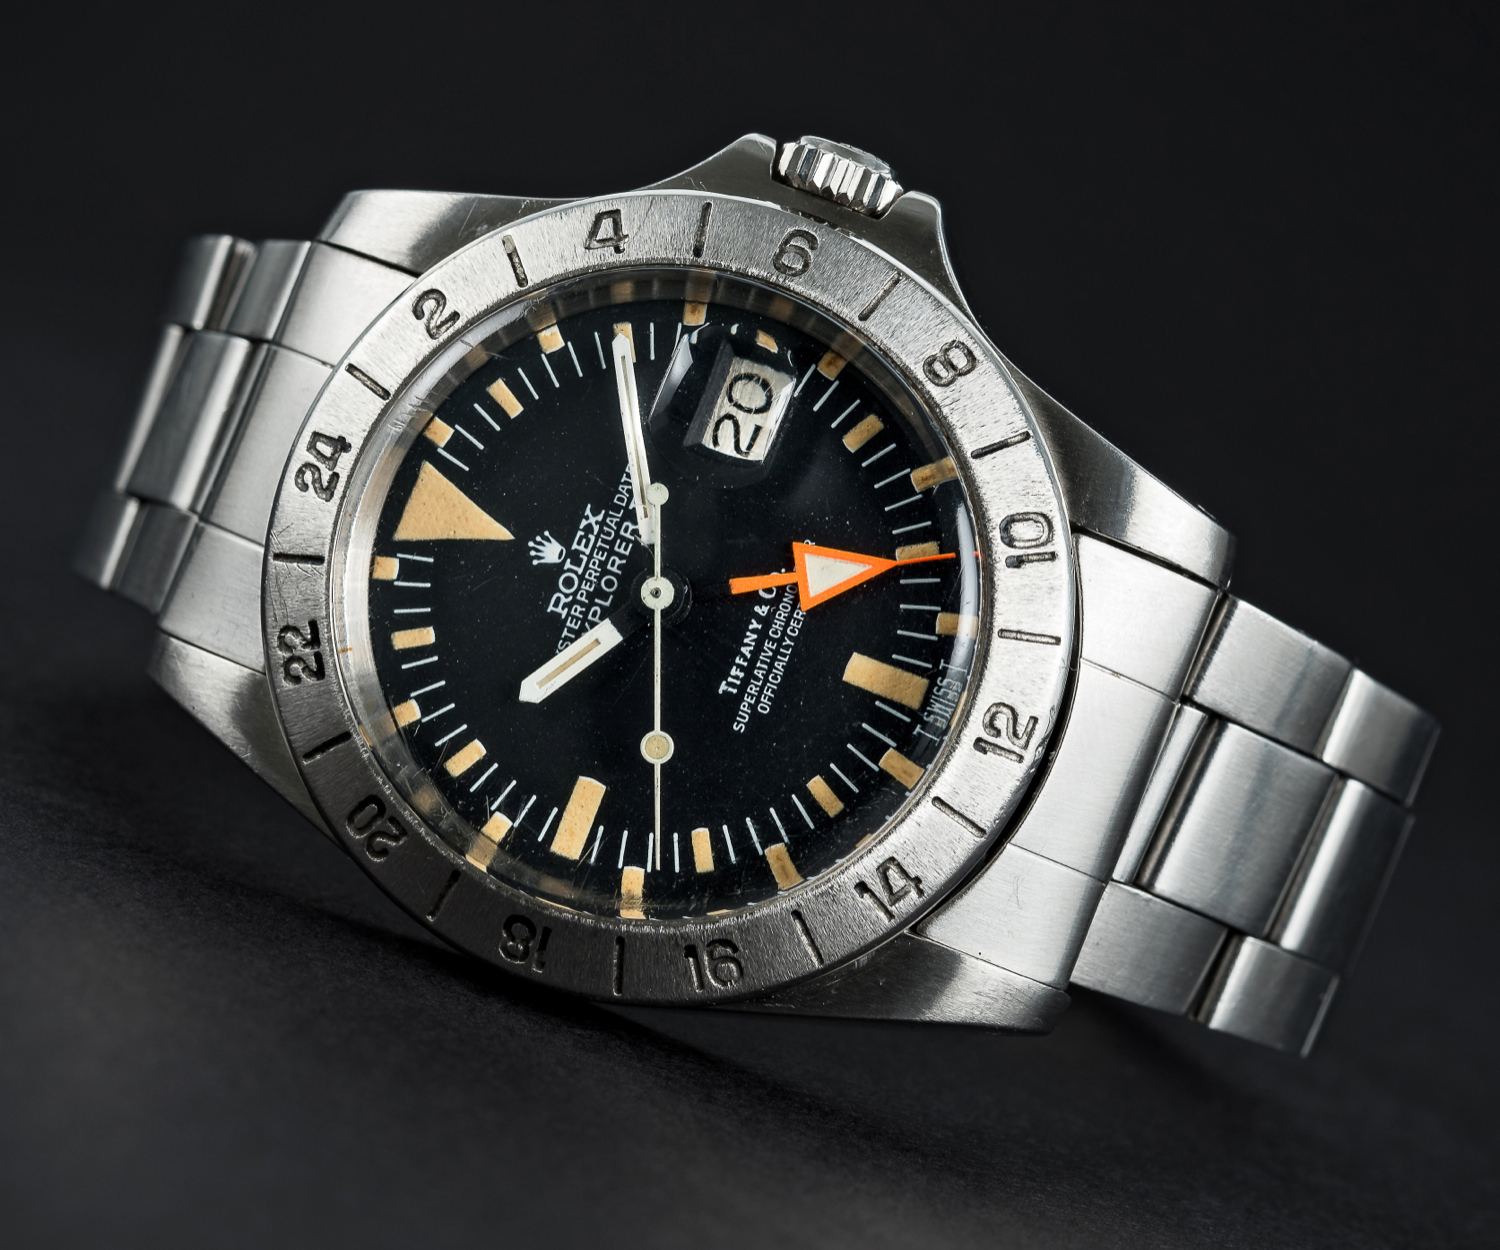 A VERY RARE GENTLEMAN'S STAINLESS STEEL ROLEX OYSTER PERPETUAL DATE EXPLORER II "ORANGE HAND" - Image 2 of 13